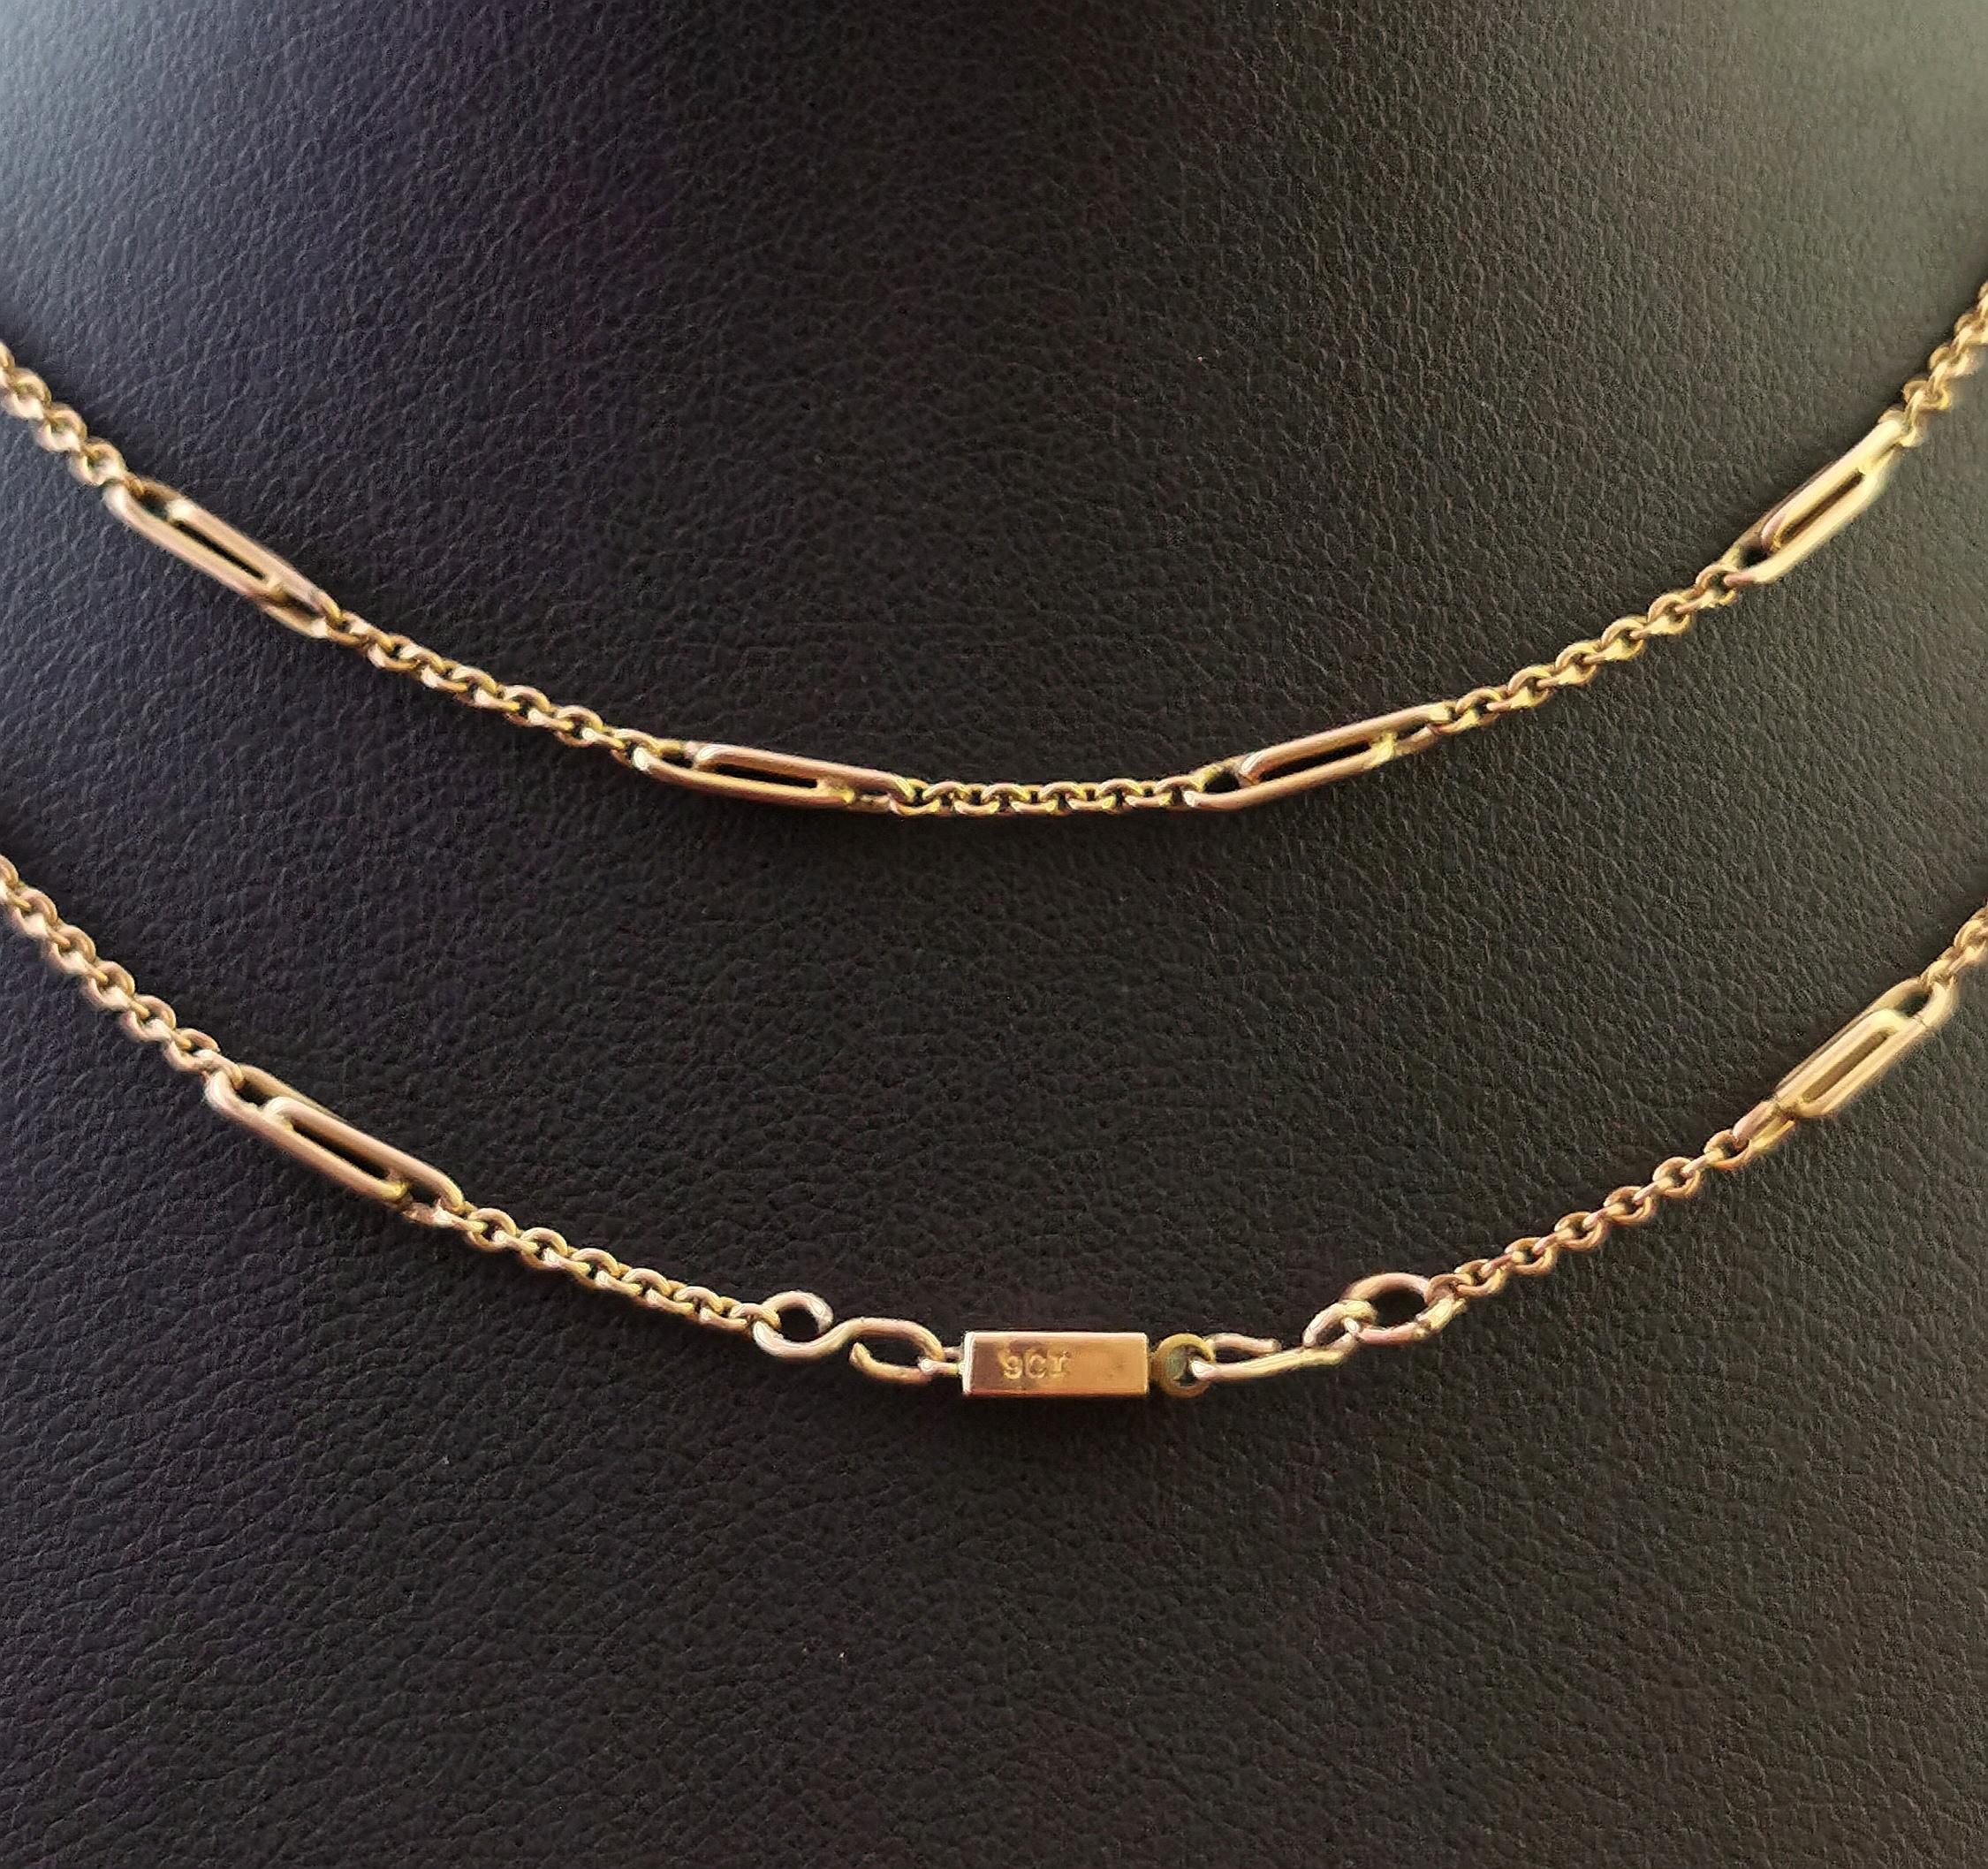 A beautiful antique, early 20th century 9kt gold fancy link chain necklace.

Rich gold fine belcher links intercepted by pretty paperclip links, this classic beauty is a good wearable length at 18